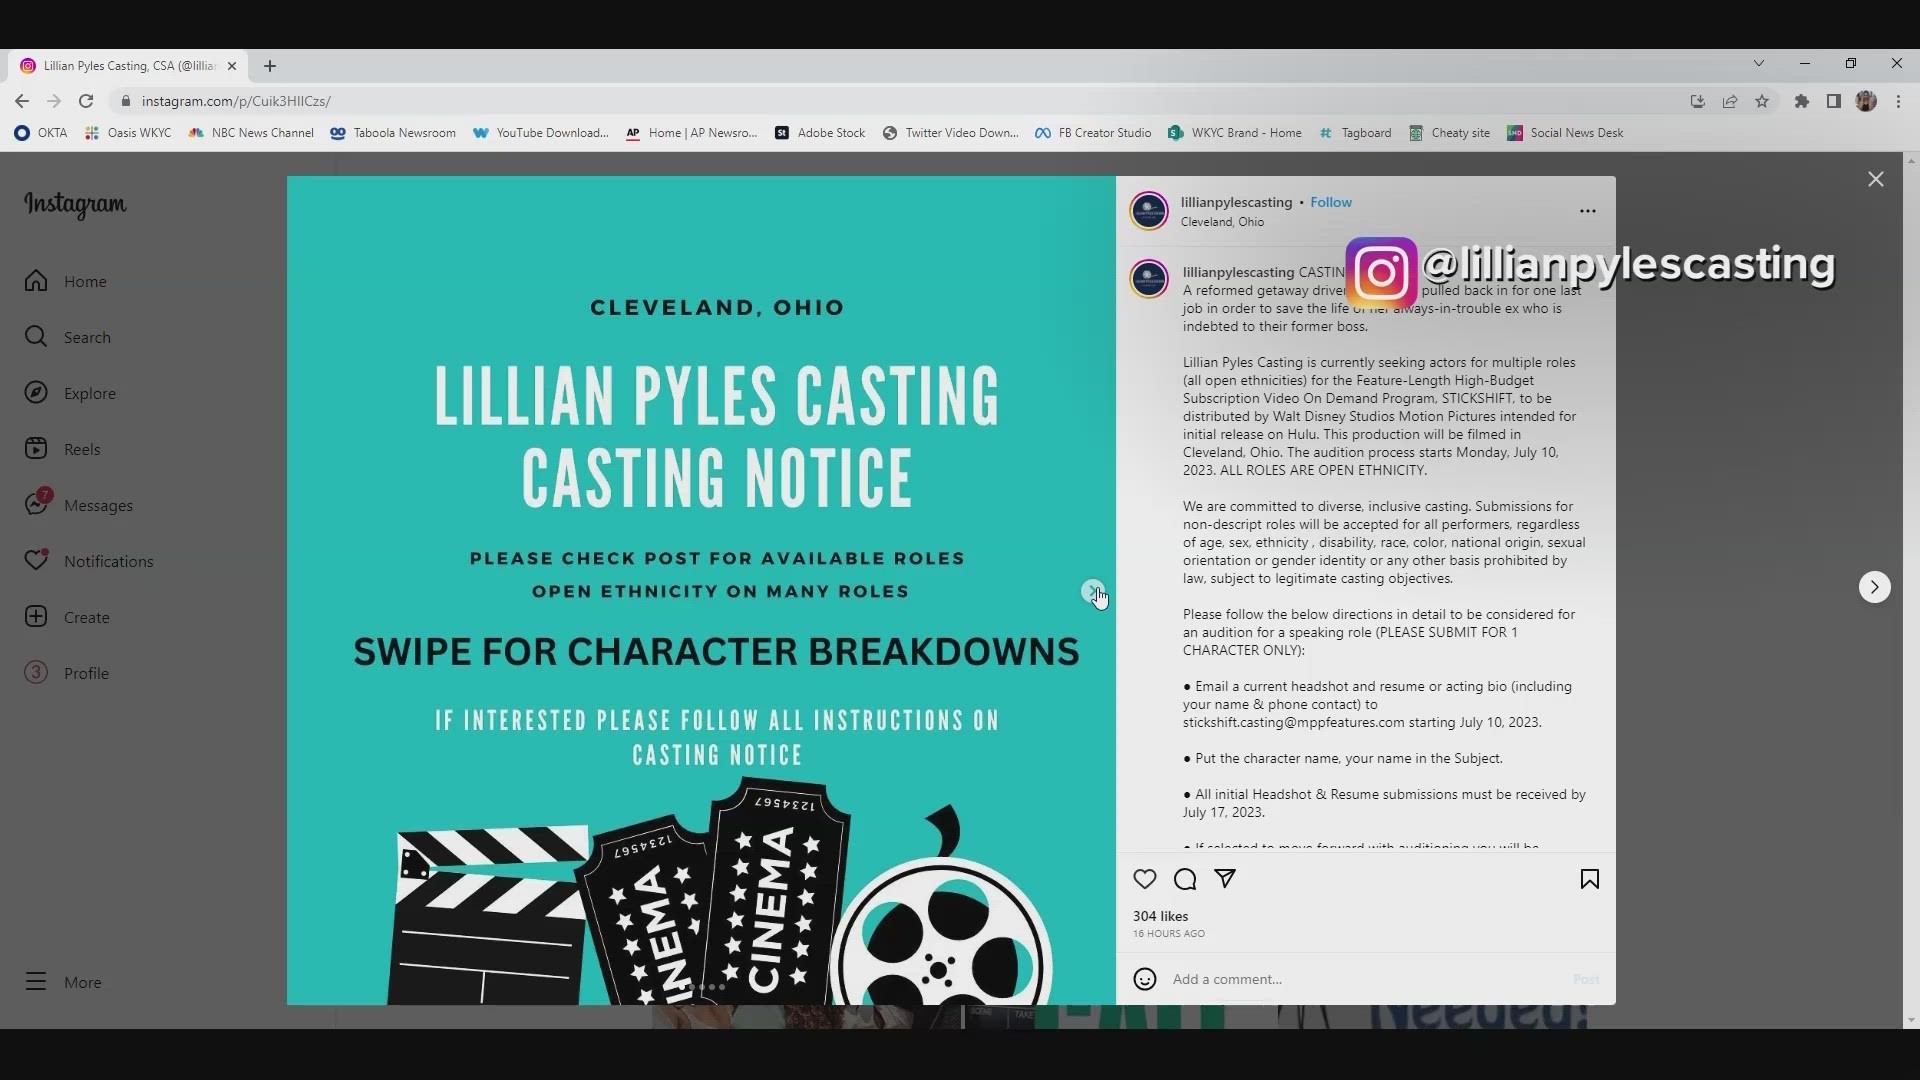 Want to audition? Lillian Pyles Casting says all initial headshot and resume submissions must be received by July 17, 2023.